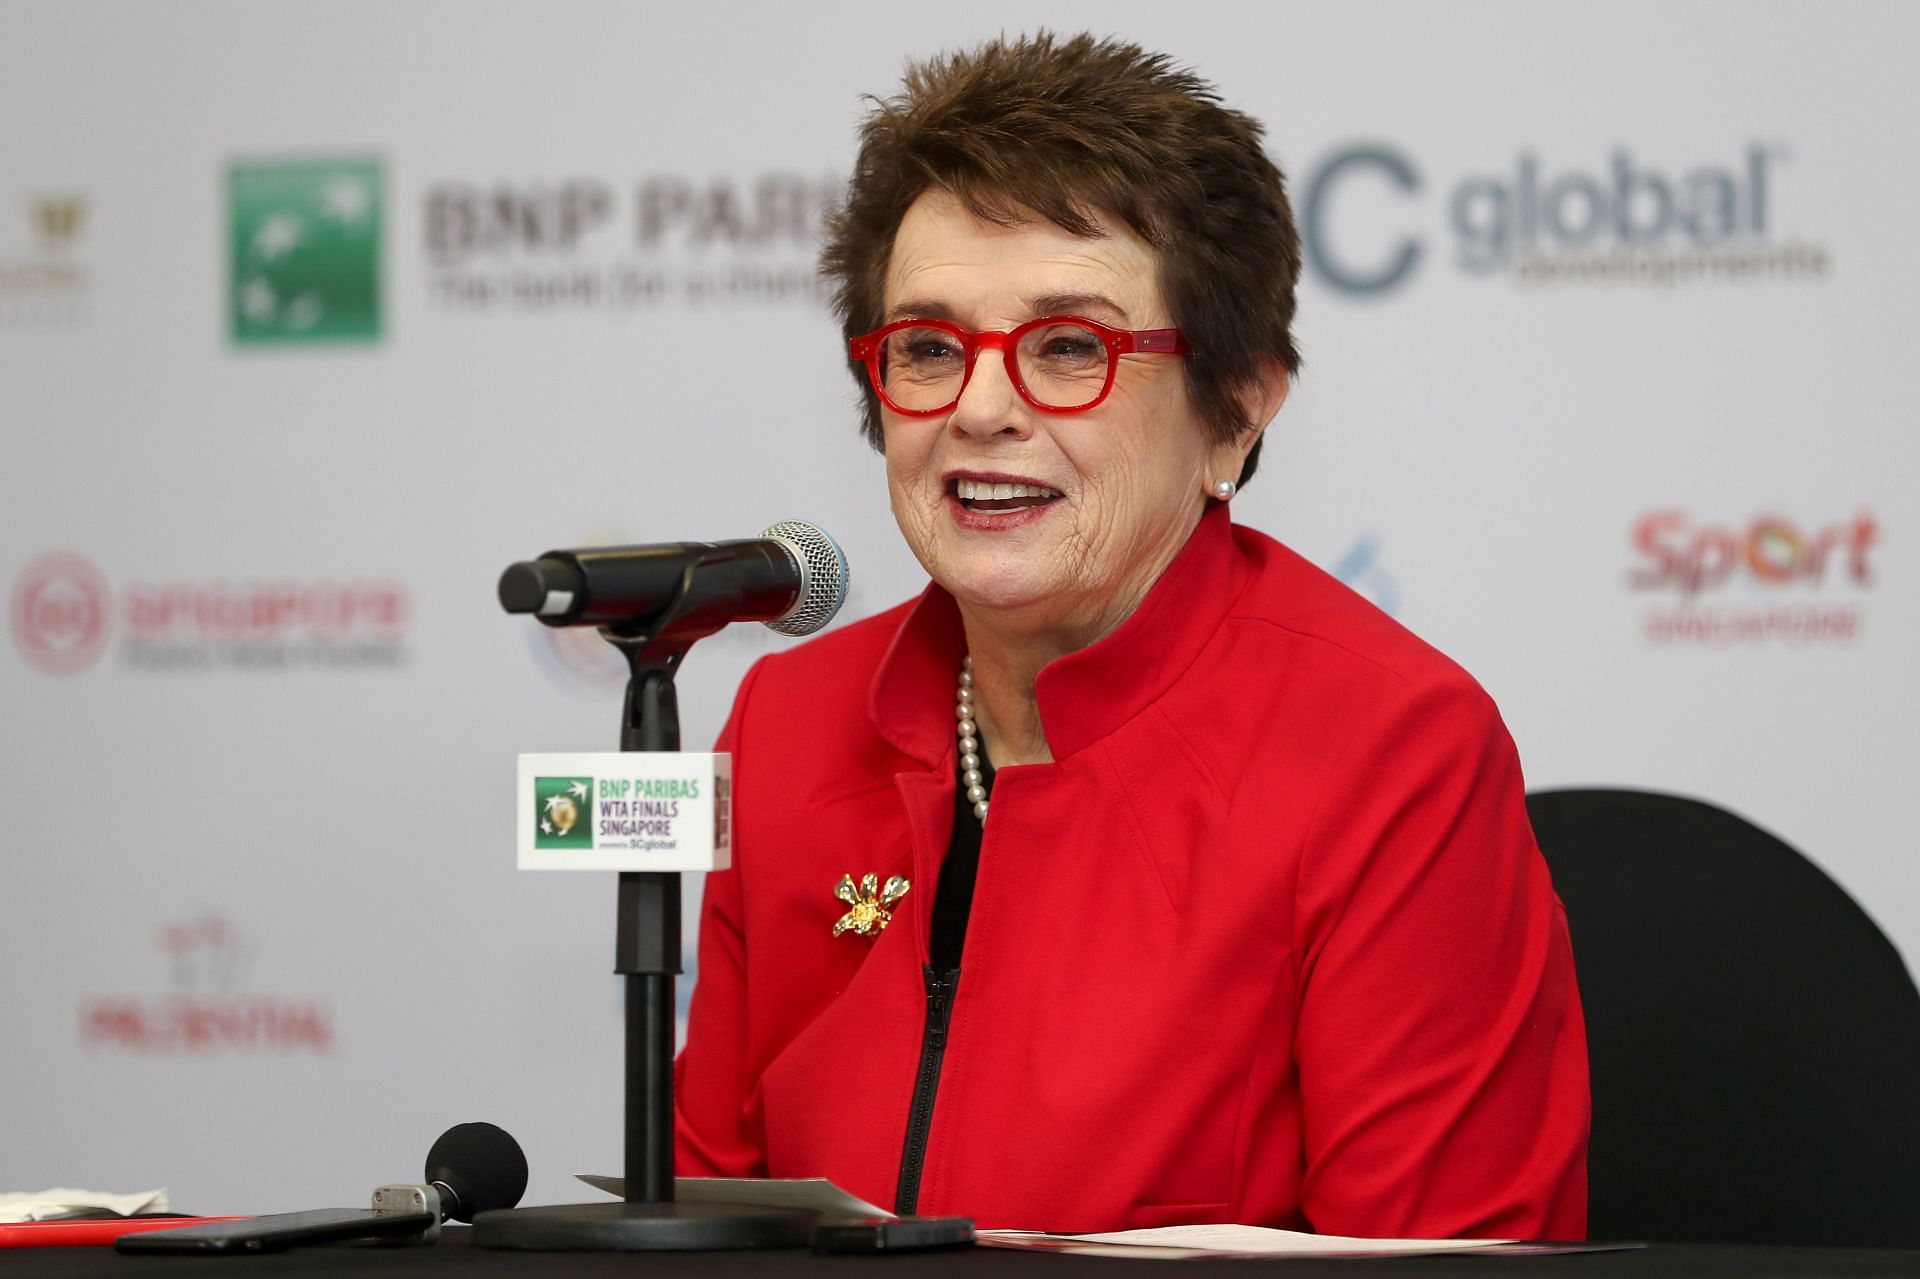 Billie Jean Kings interacts with the media at the 2018 WTA Finals